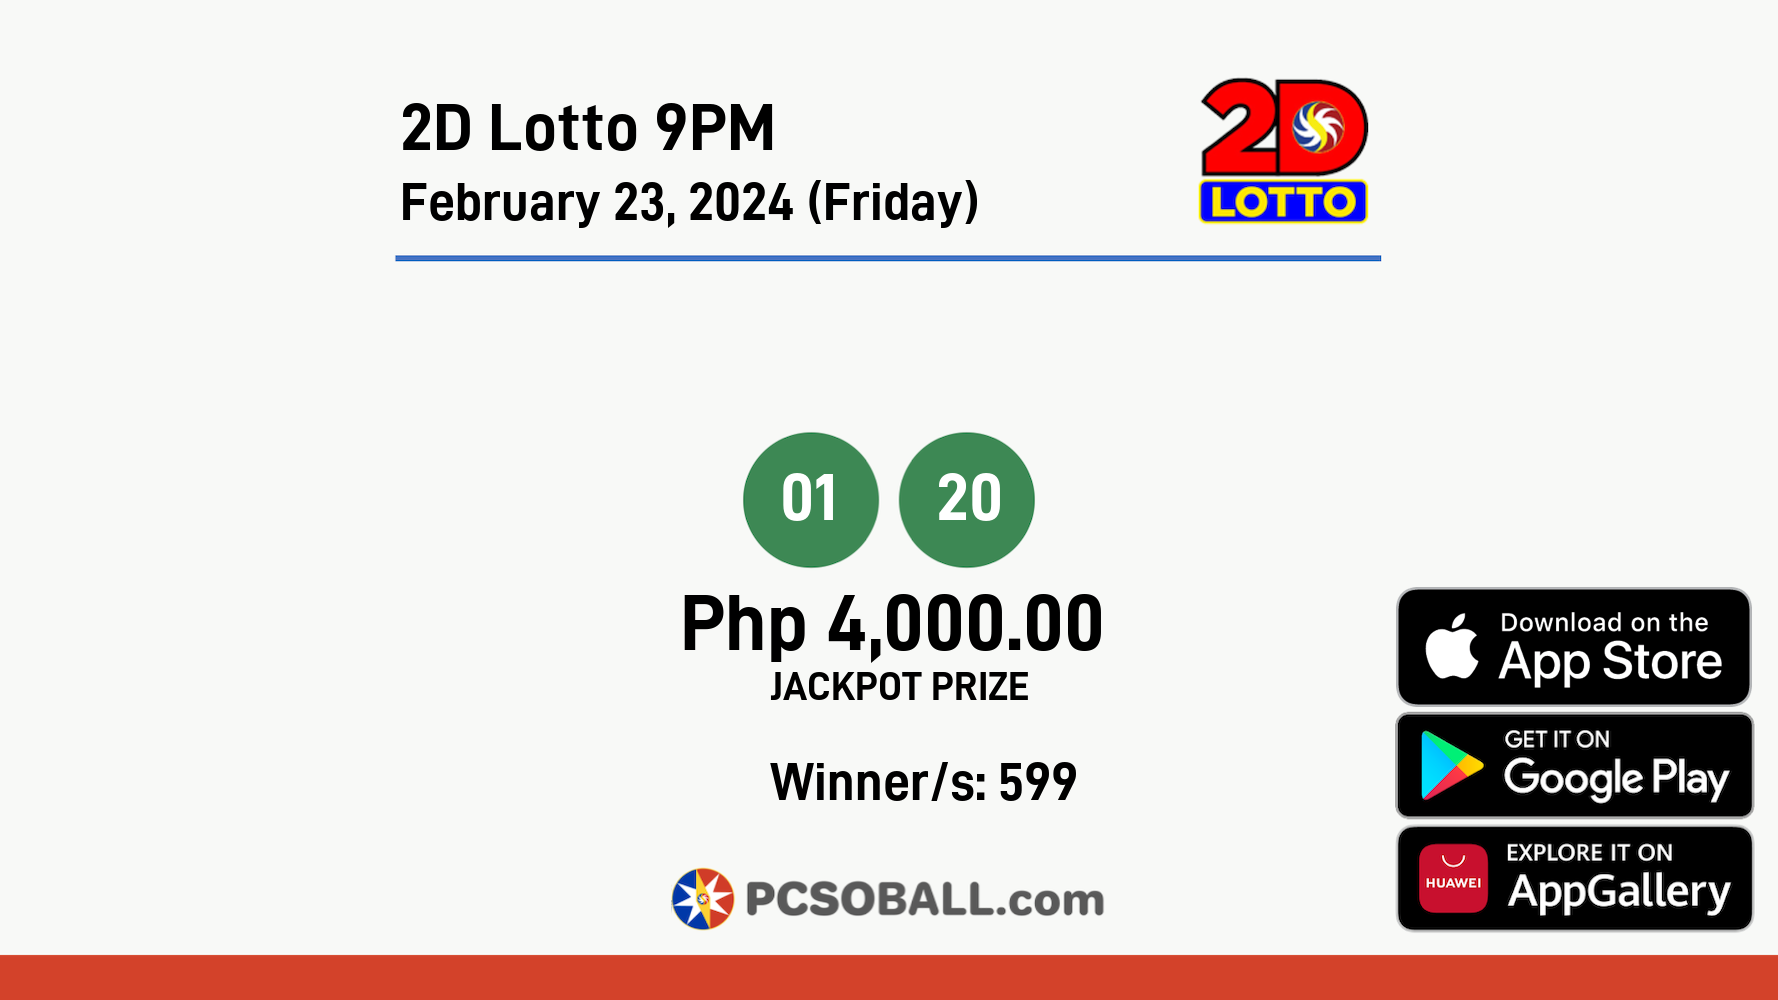 2D Lotto 9PM February 23, 2024 (Friday) Result